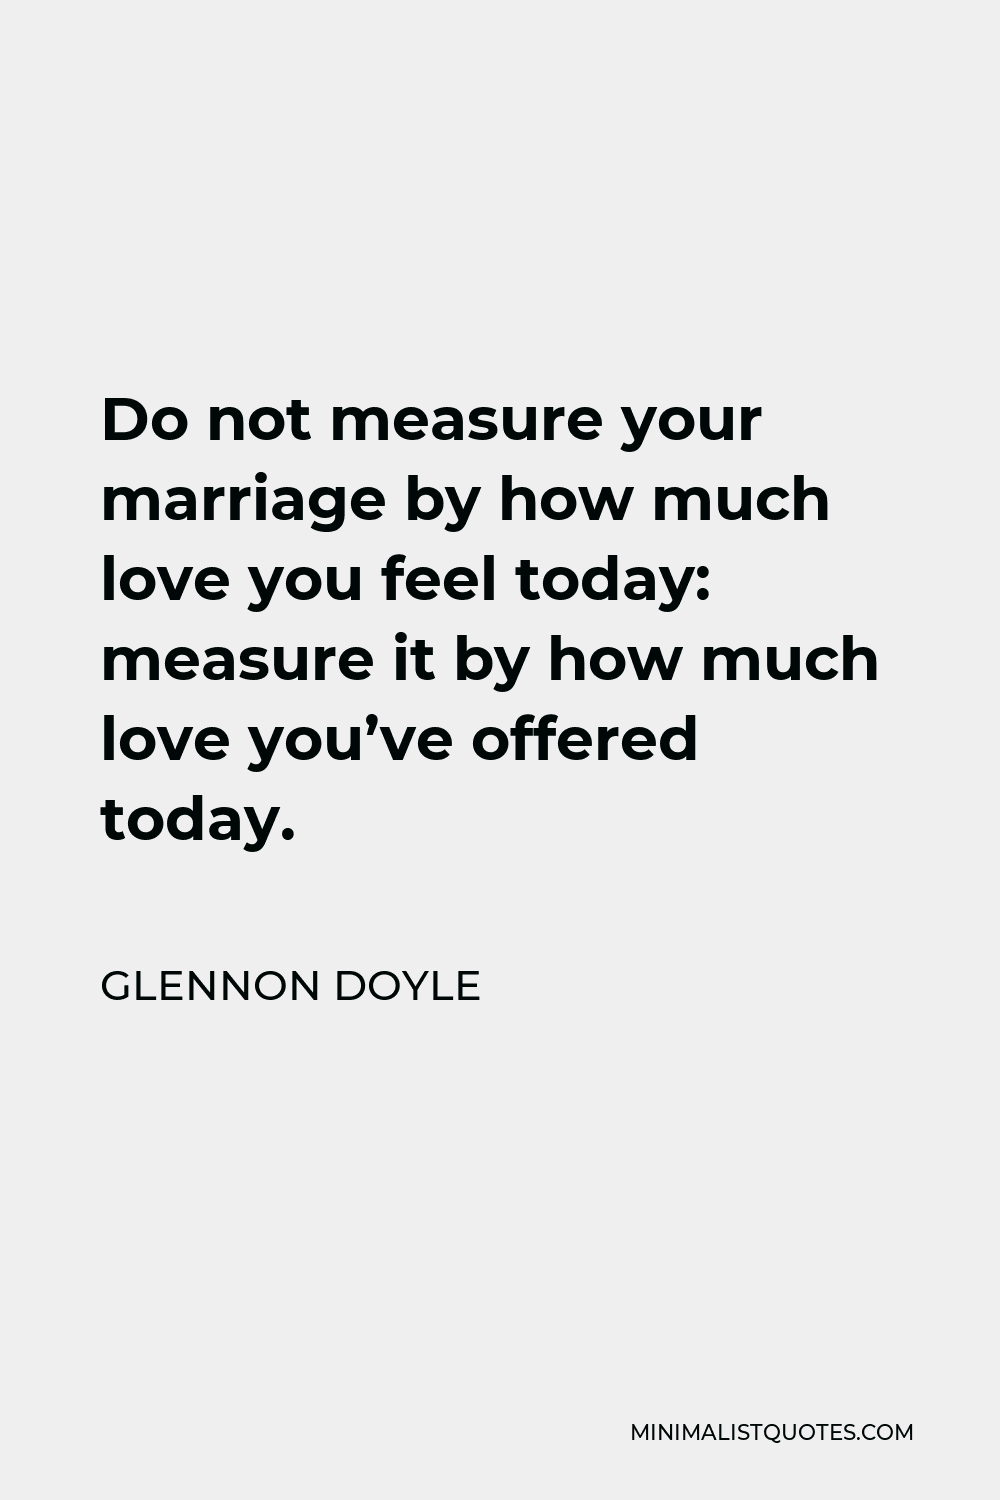 Glennon Doyle Quote - Do not measure your marriage by how much love you feel today: measure it by how much love you’ve offered today.